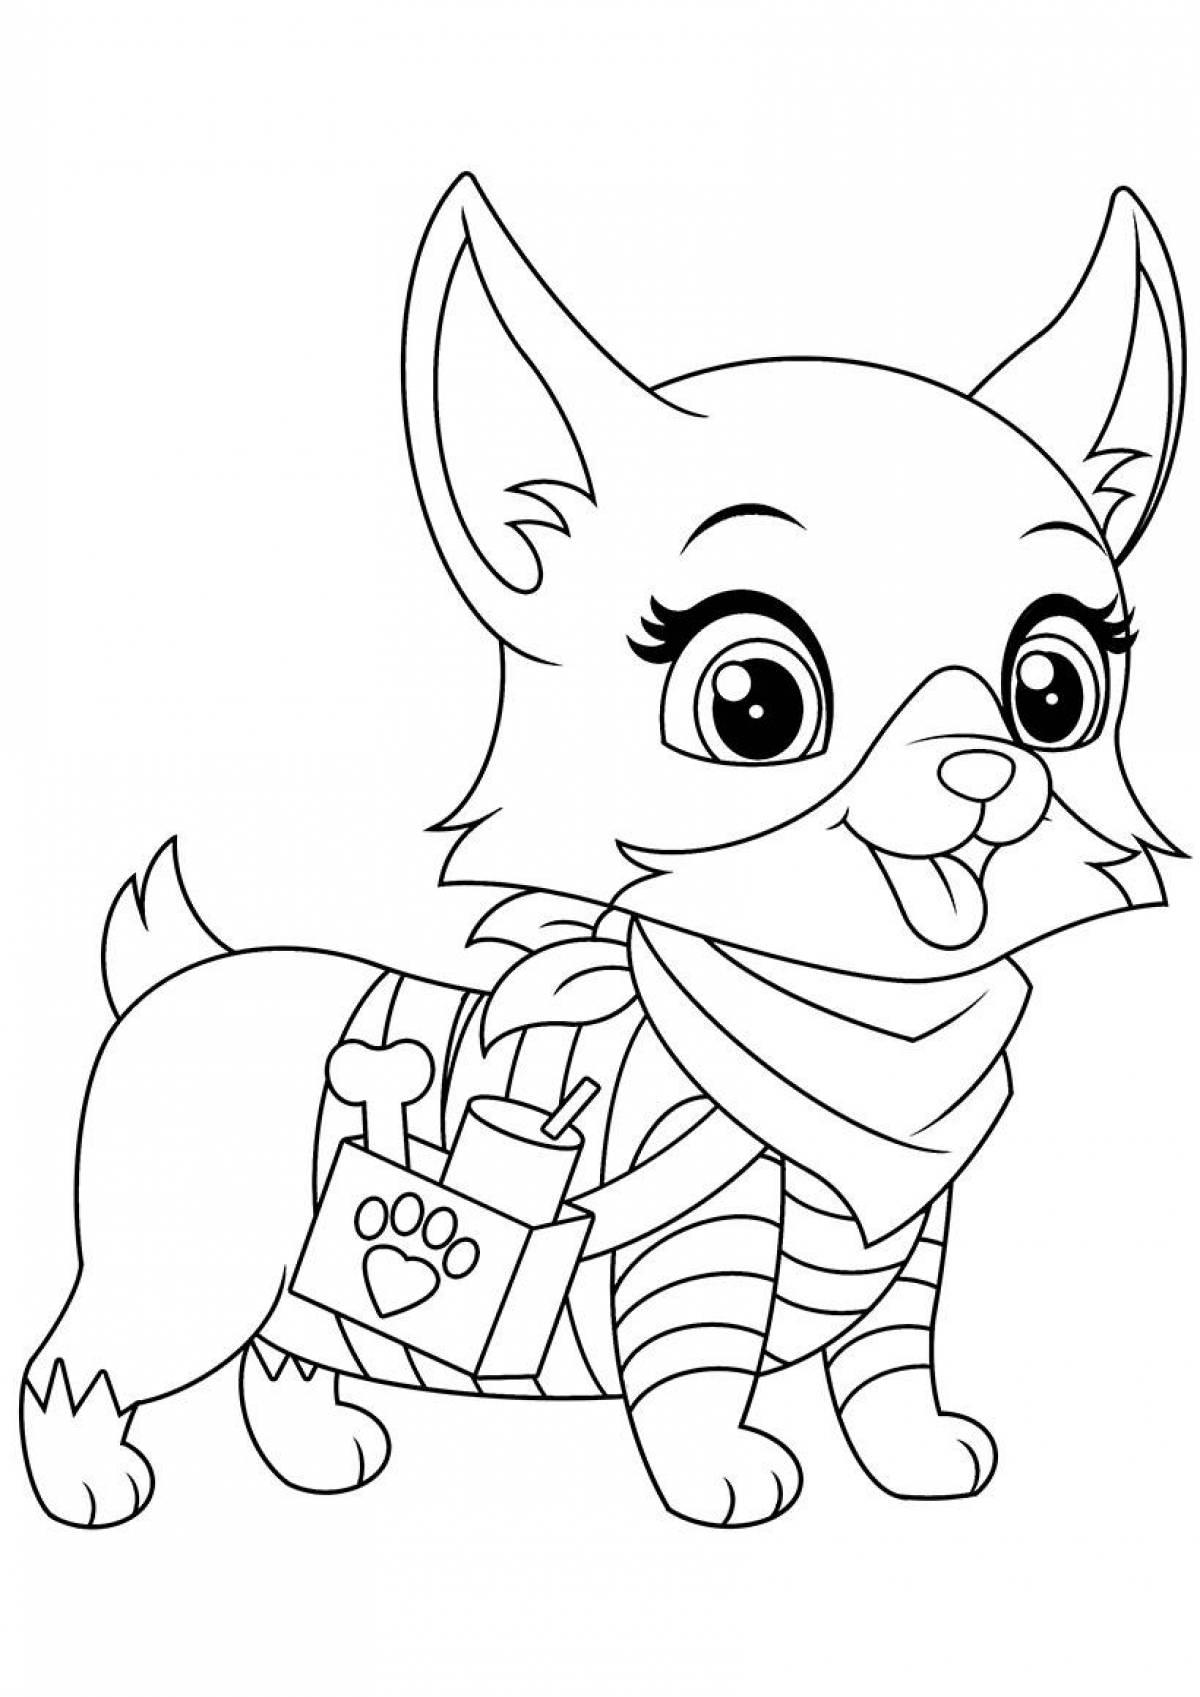 Coloring book big-pawed dogs kittens